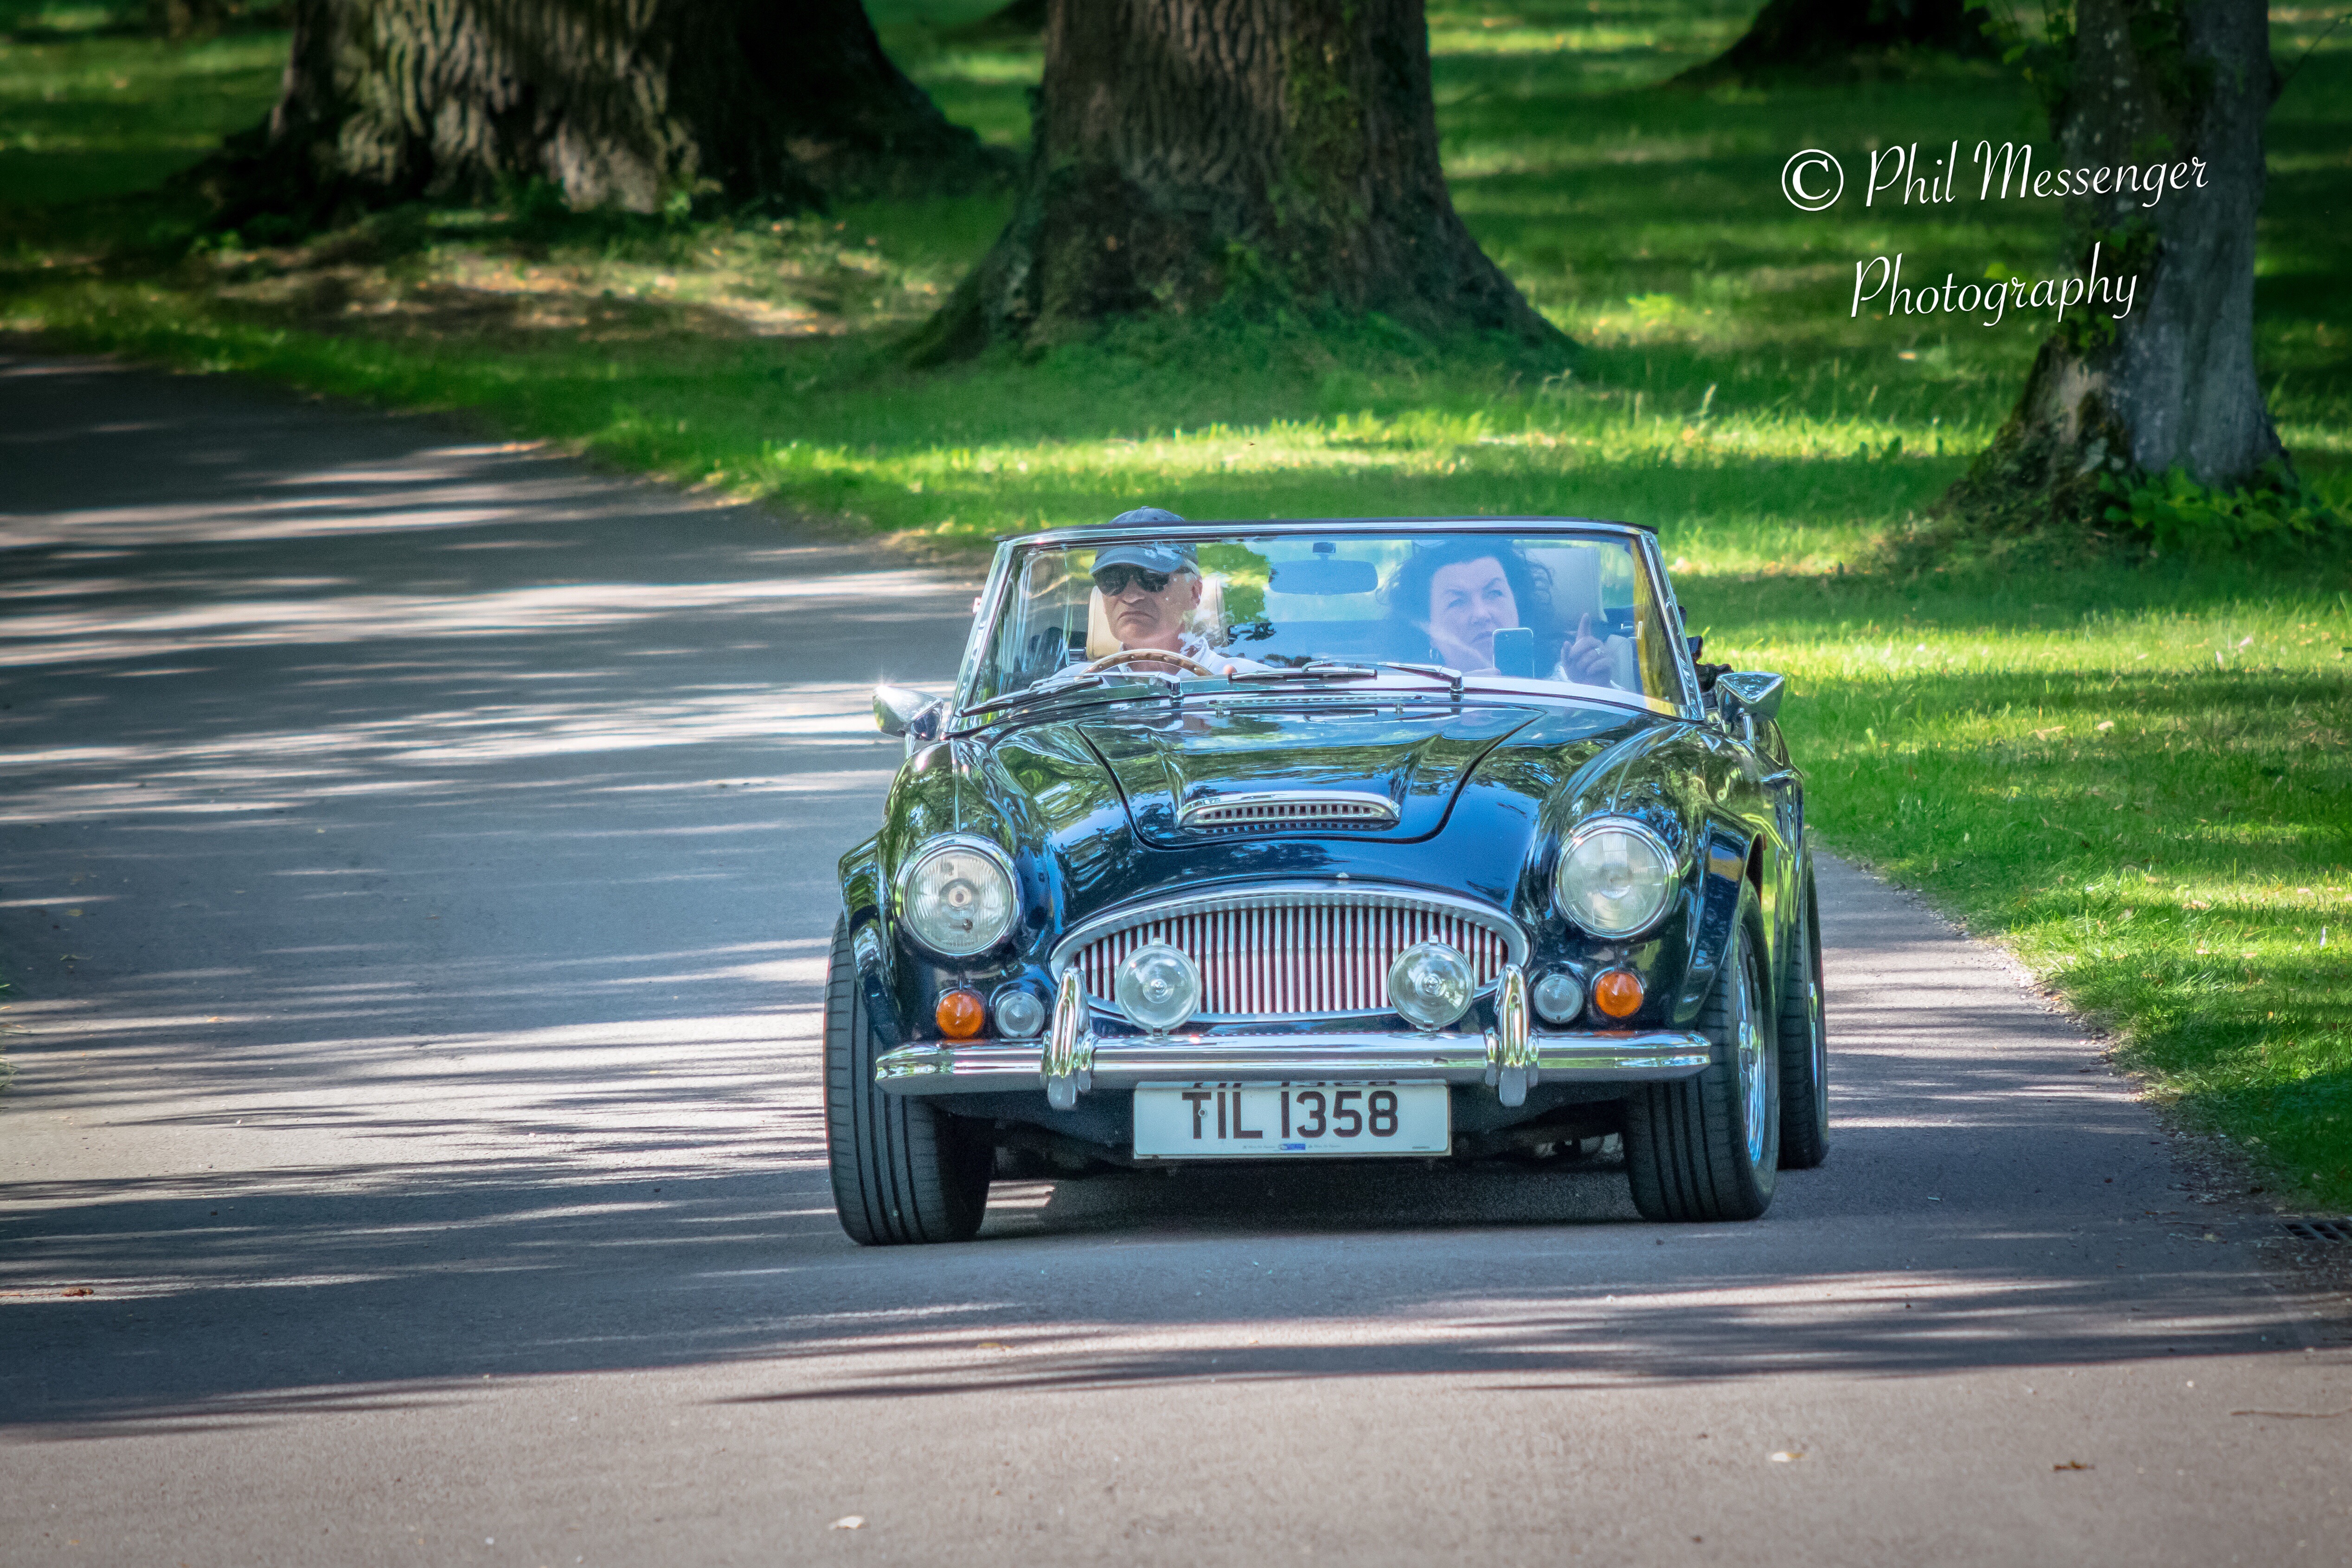 A couple of quick shots of this beautiful Austin Healey as it drove into Buscot Park, Oxfordshire.